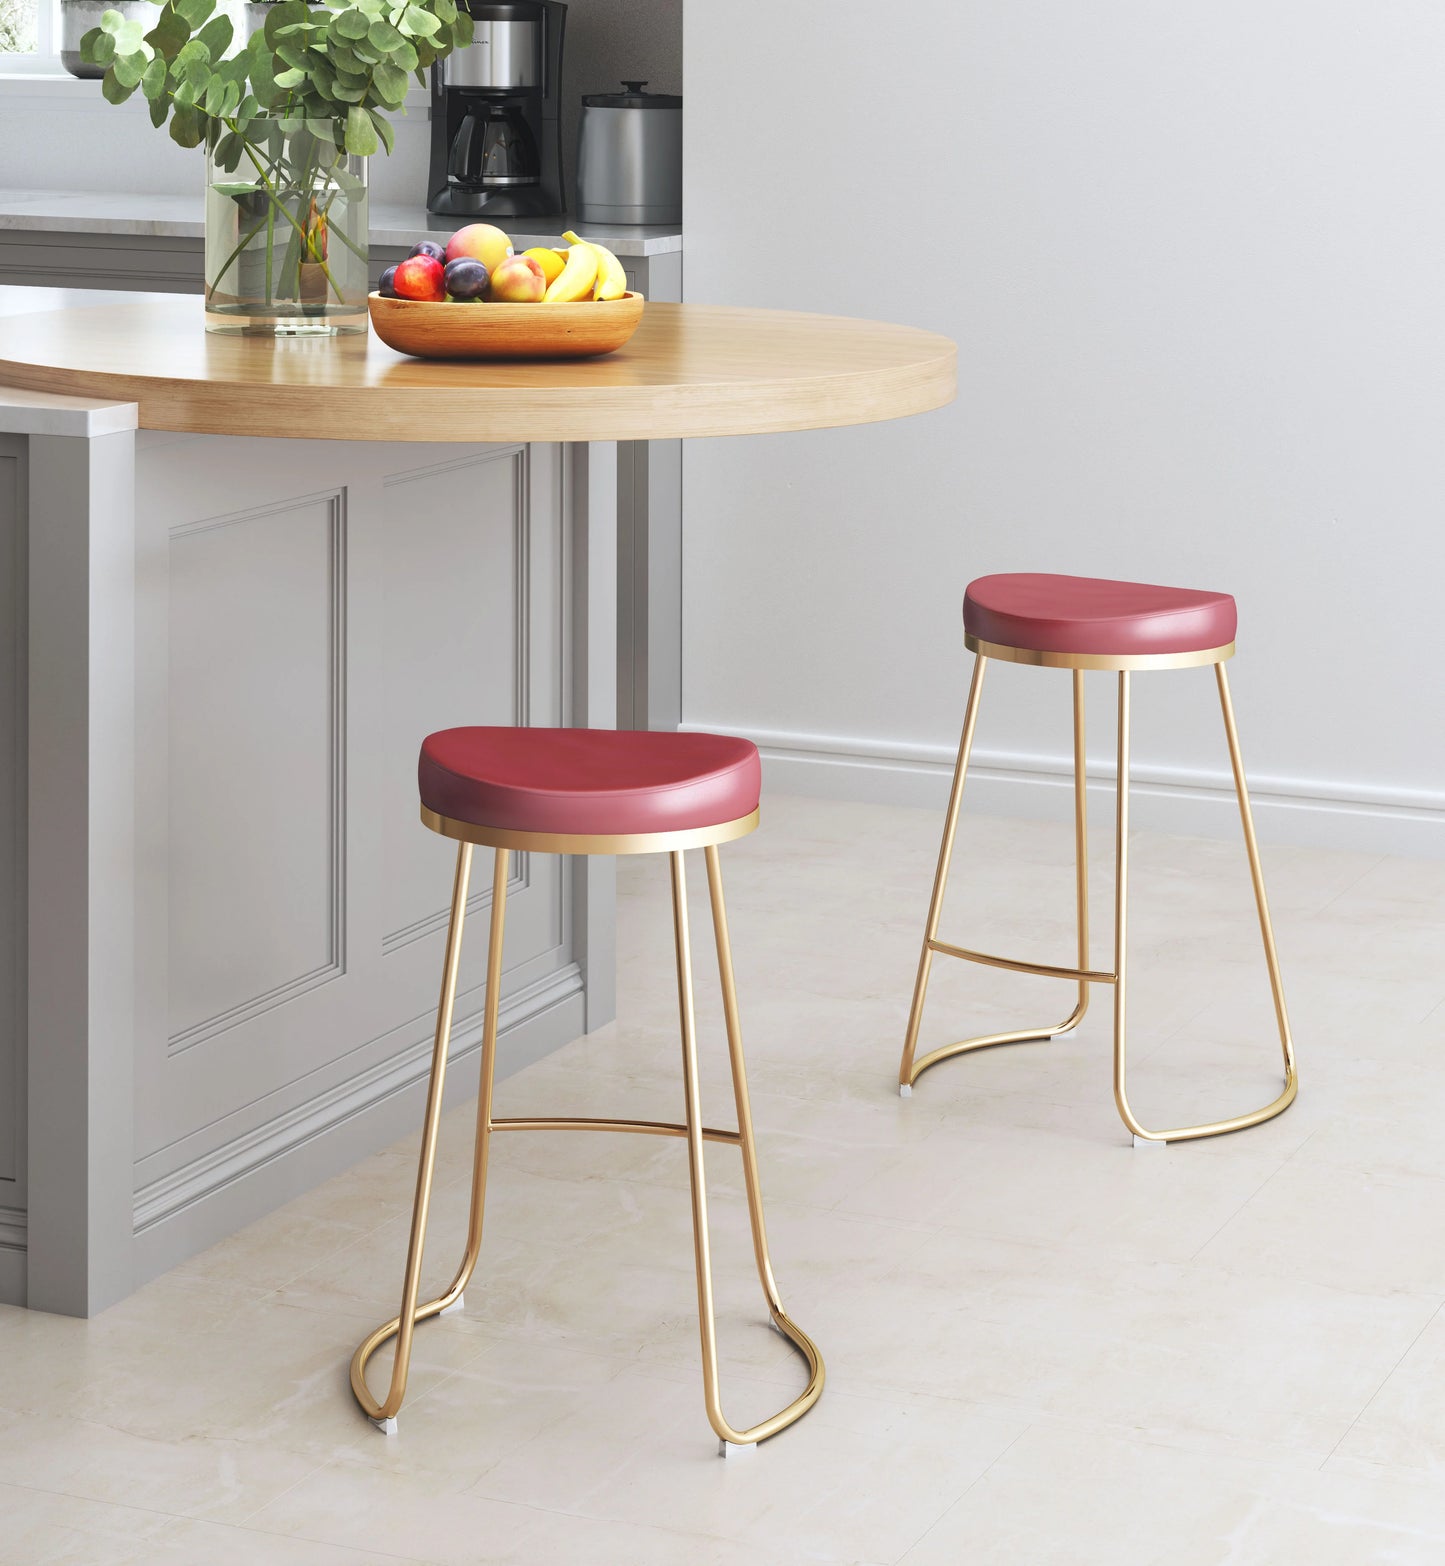 Bree Counter Stool Burgundy and Gold full view